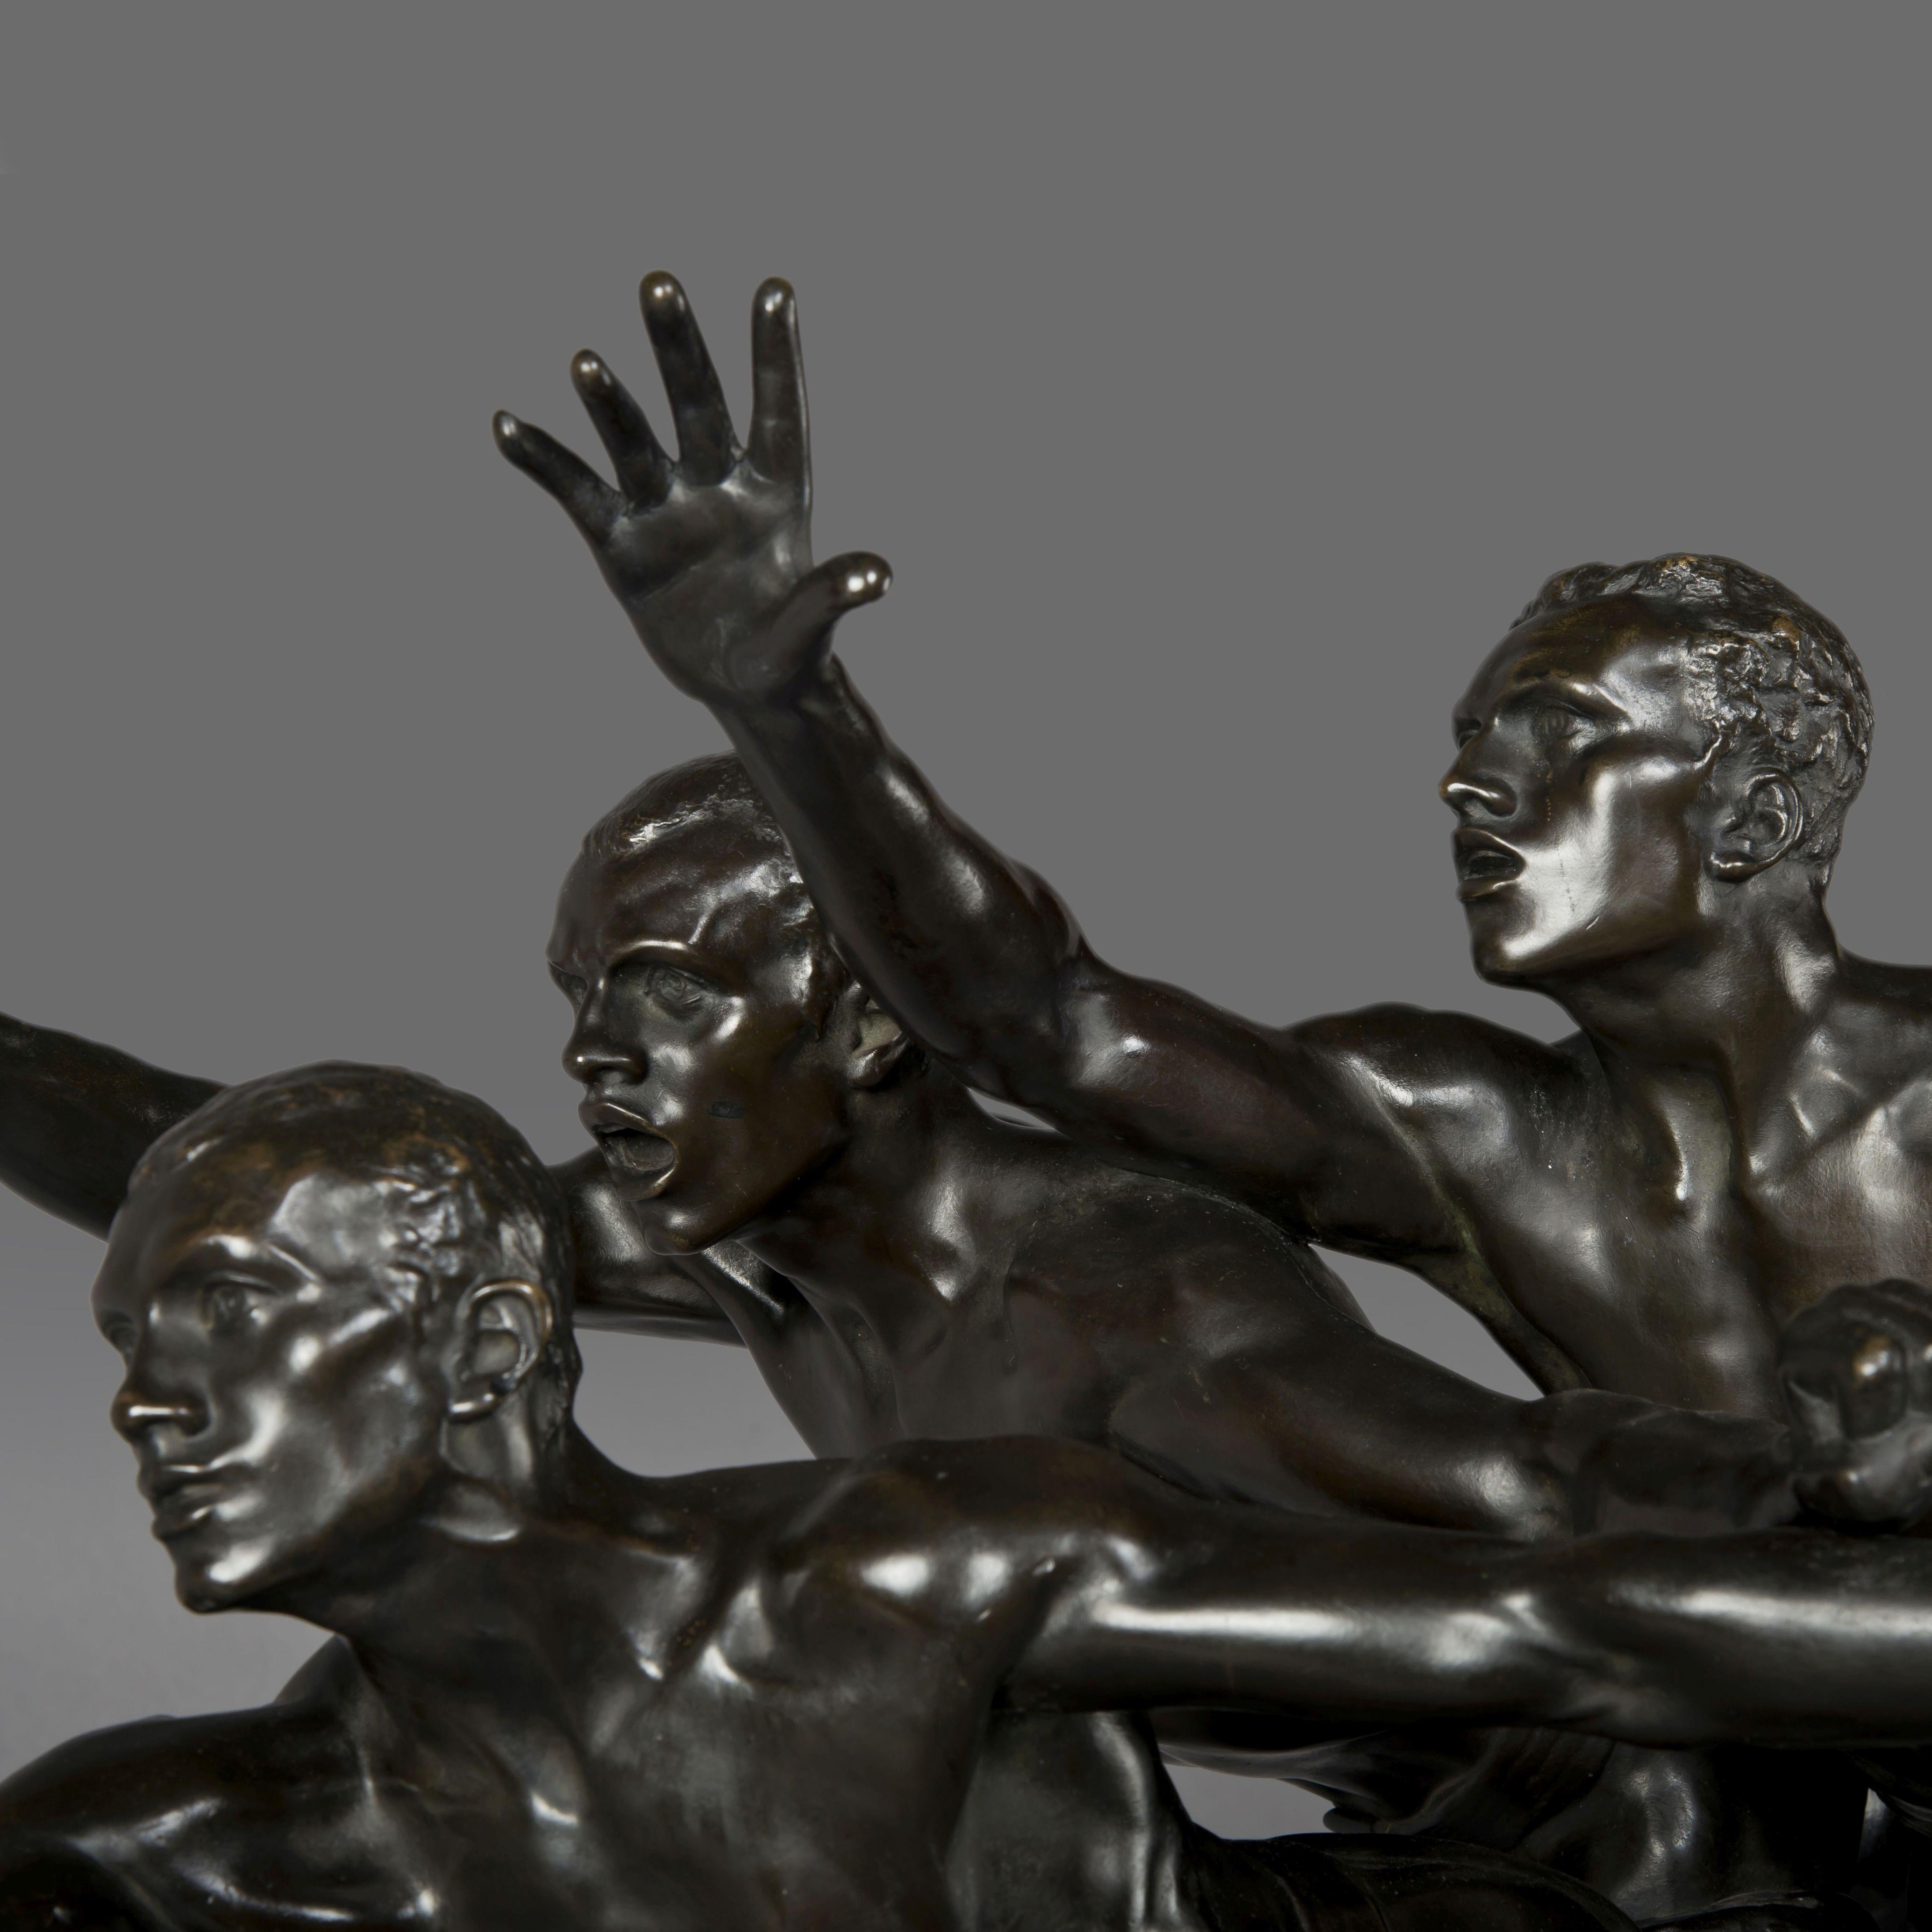 'Au But' (To the goal), a very fine patinated bronze figural group, by Alfred Boucher, raised on a rouge griotte marble base.

Signed 'A. BOUCHER' and with title plaquette 'AU BUT / 1ERE MEDAILLE D'OR SALON 1886-87 / ACQUIS PAR L'ETAT A. BOUCHER